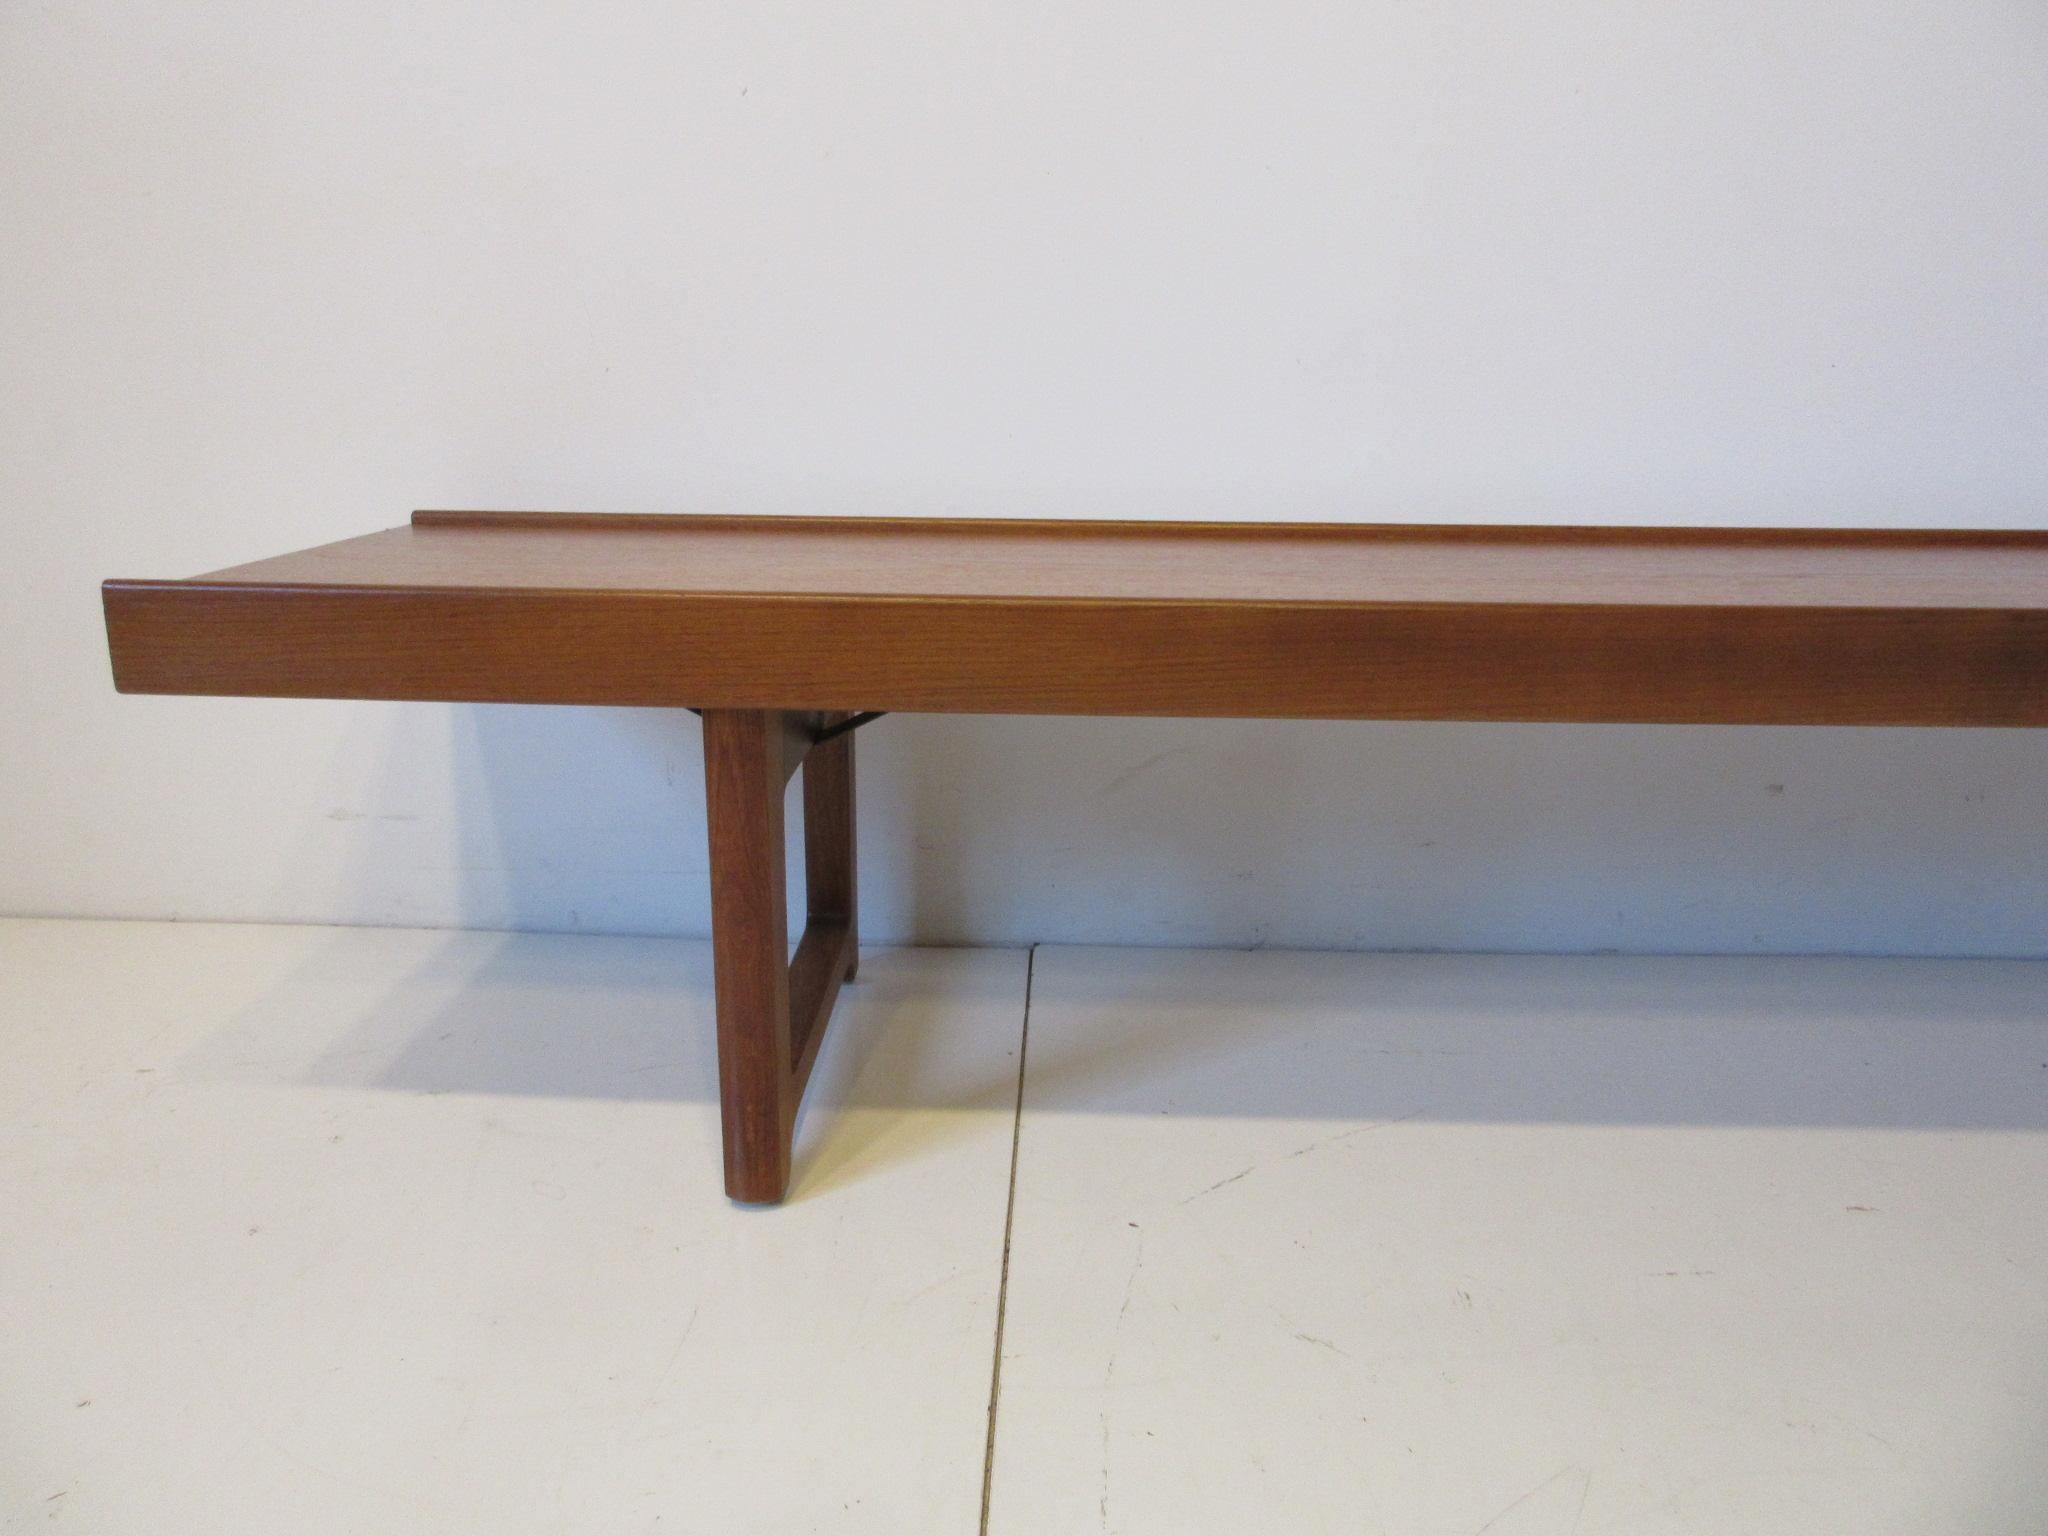 A long solid teak wood Krobo bench with lip to both front and back edges sturdy legs with lower supports this very well crafted bench is perfect for that entrance way or large window area when you need extra seating or just a stylish piece of